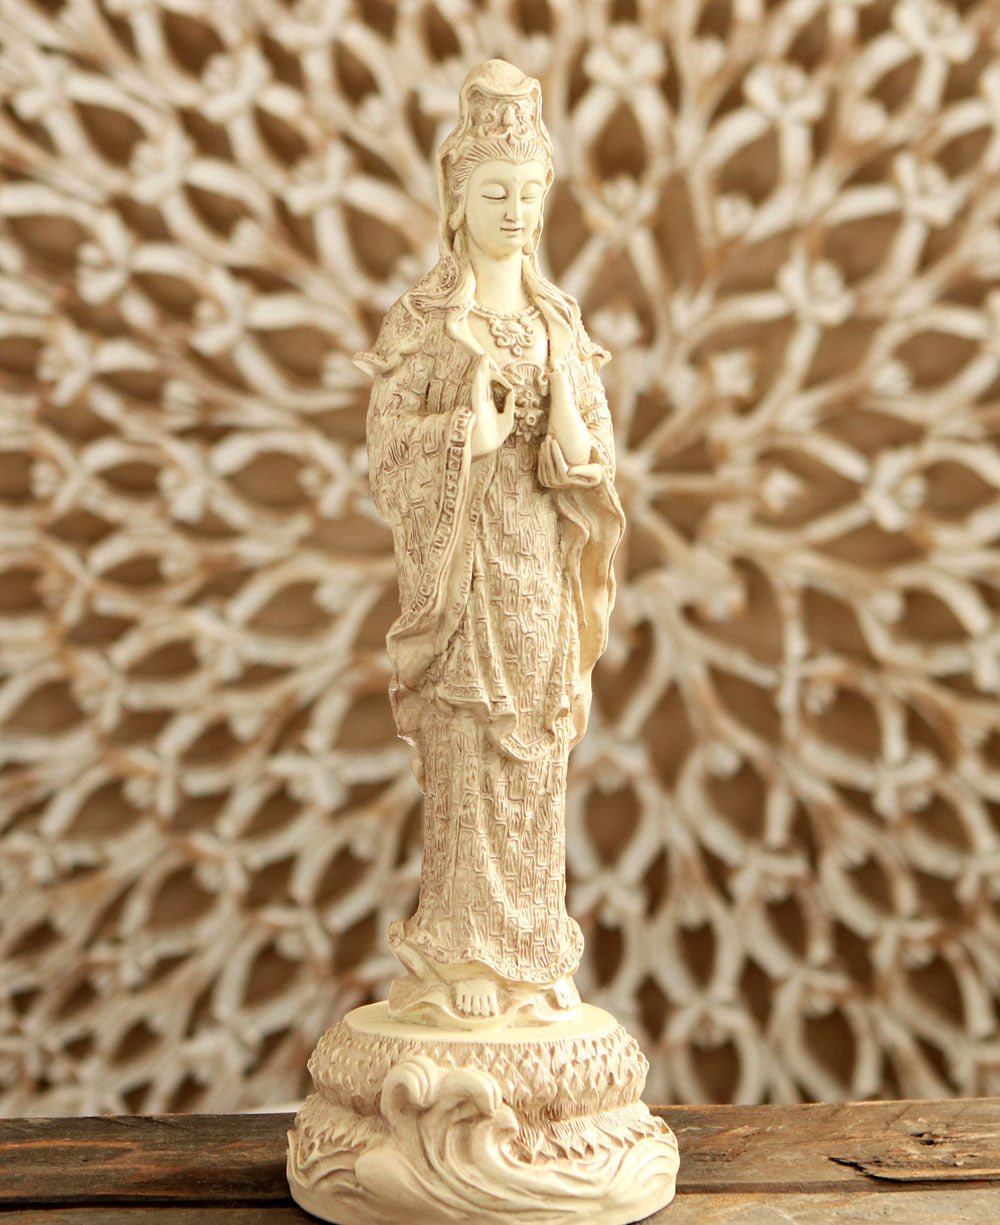 Kuan Yin Statue Holding a Vase, 12.25 Inches Tall - Sculptures & Statues